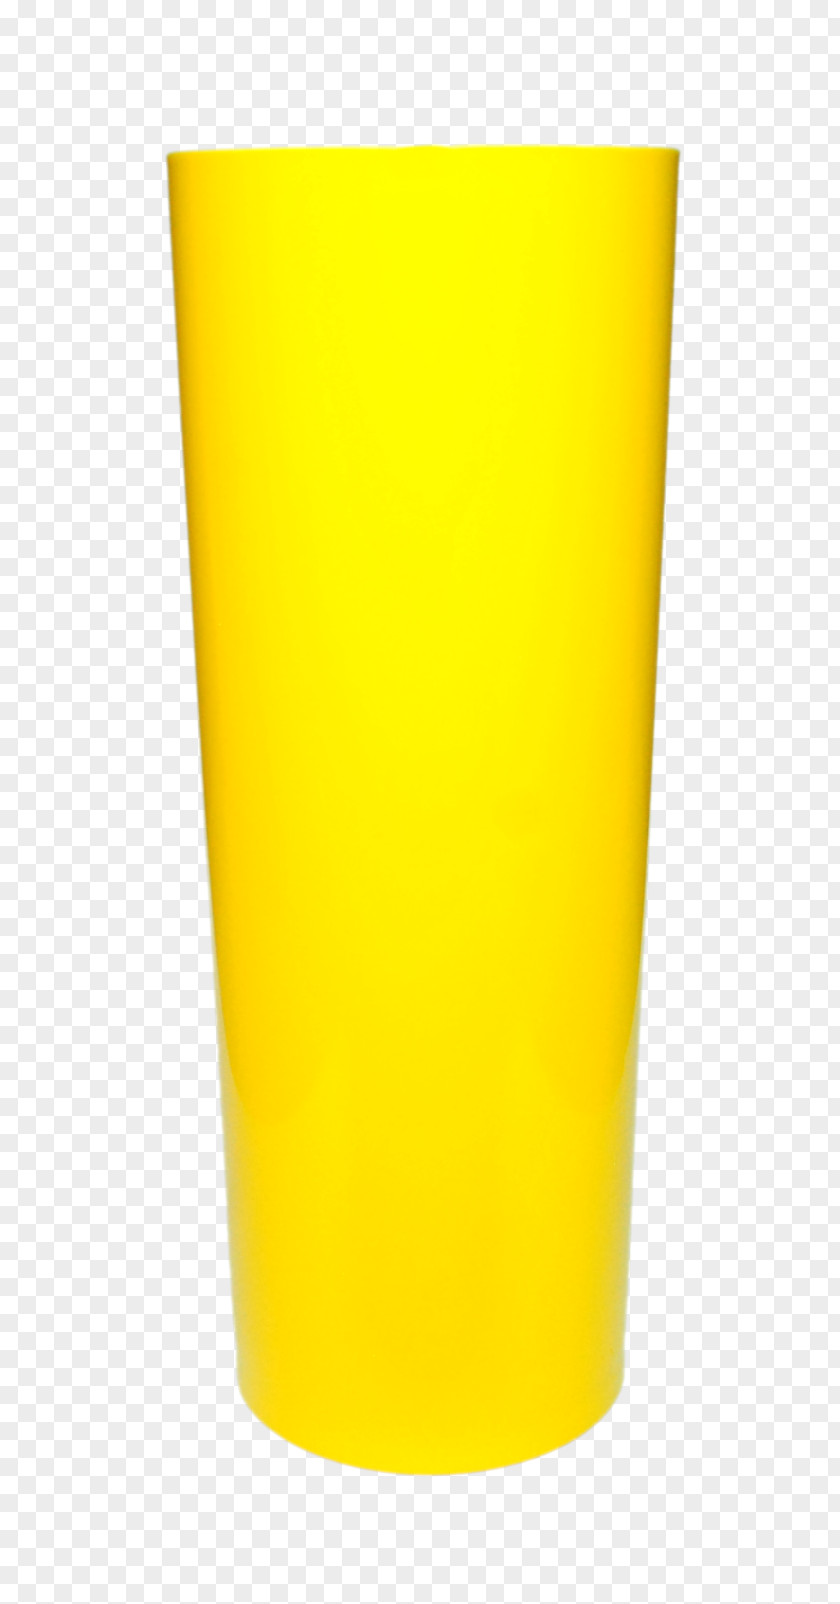 Two-eleven Taobao Cup Pint Glass PNG